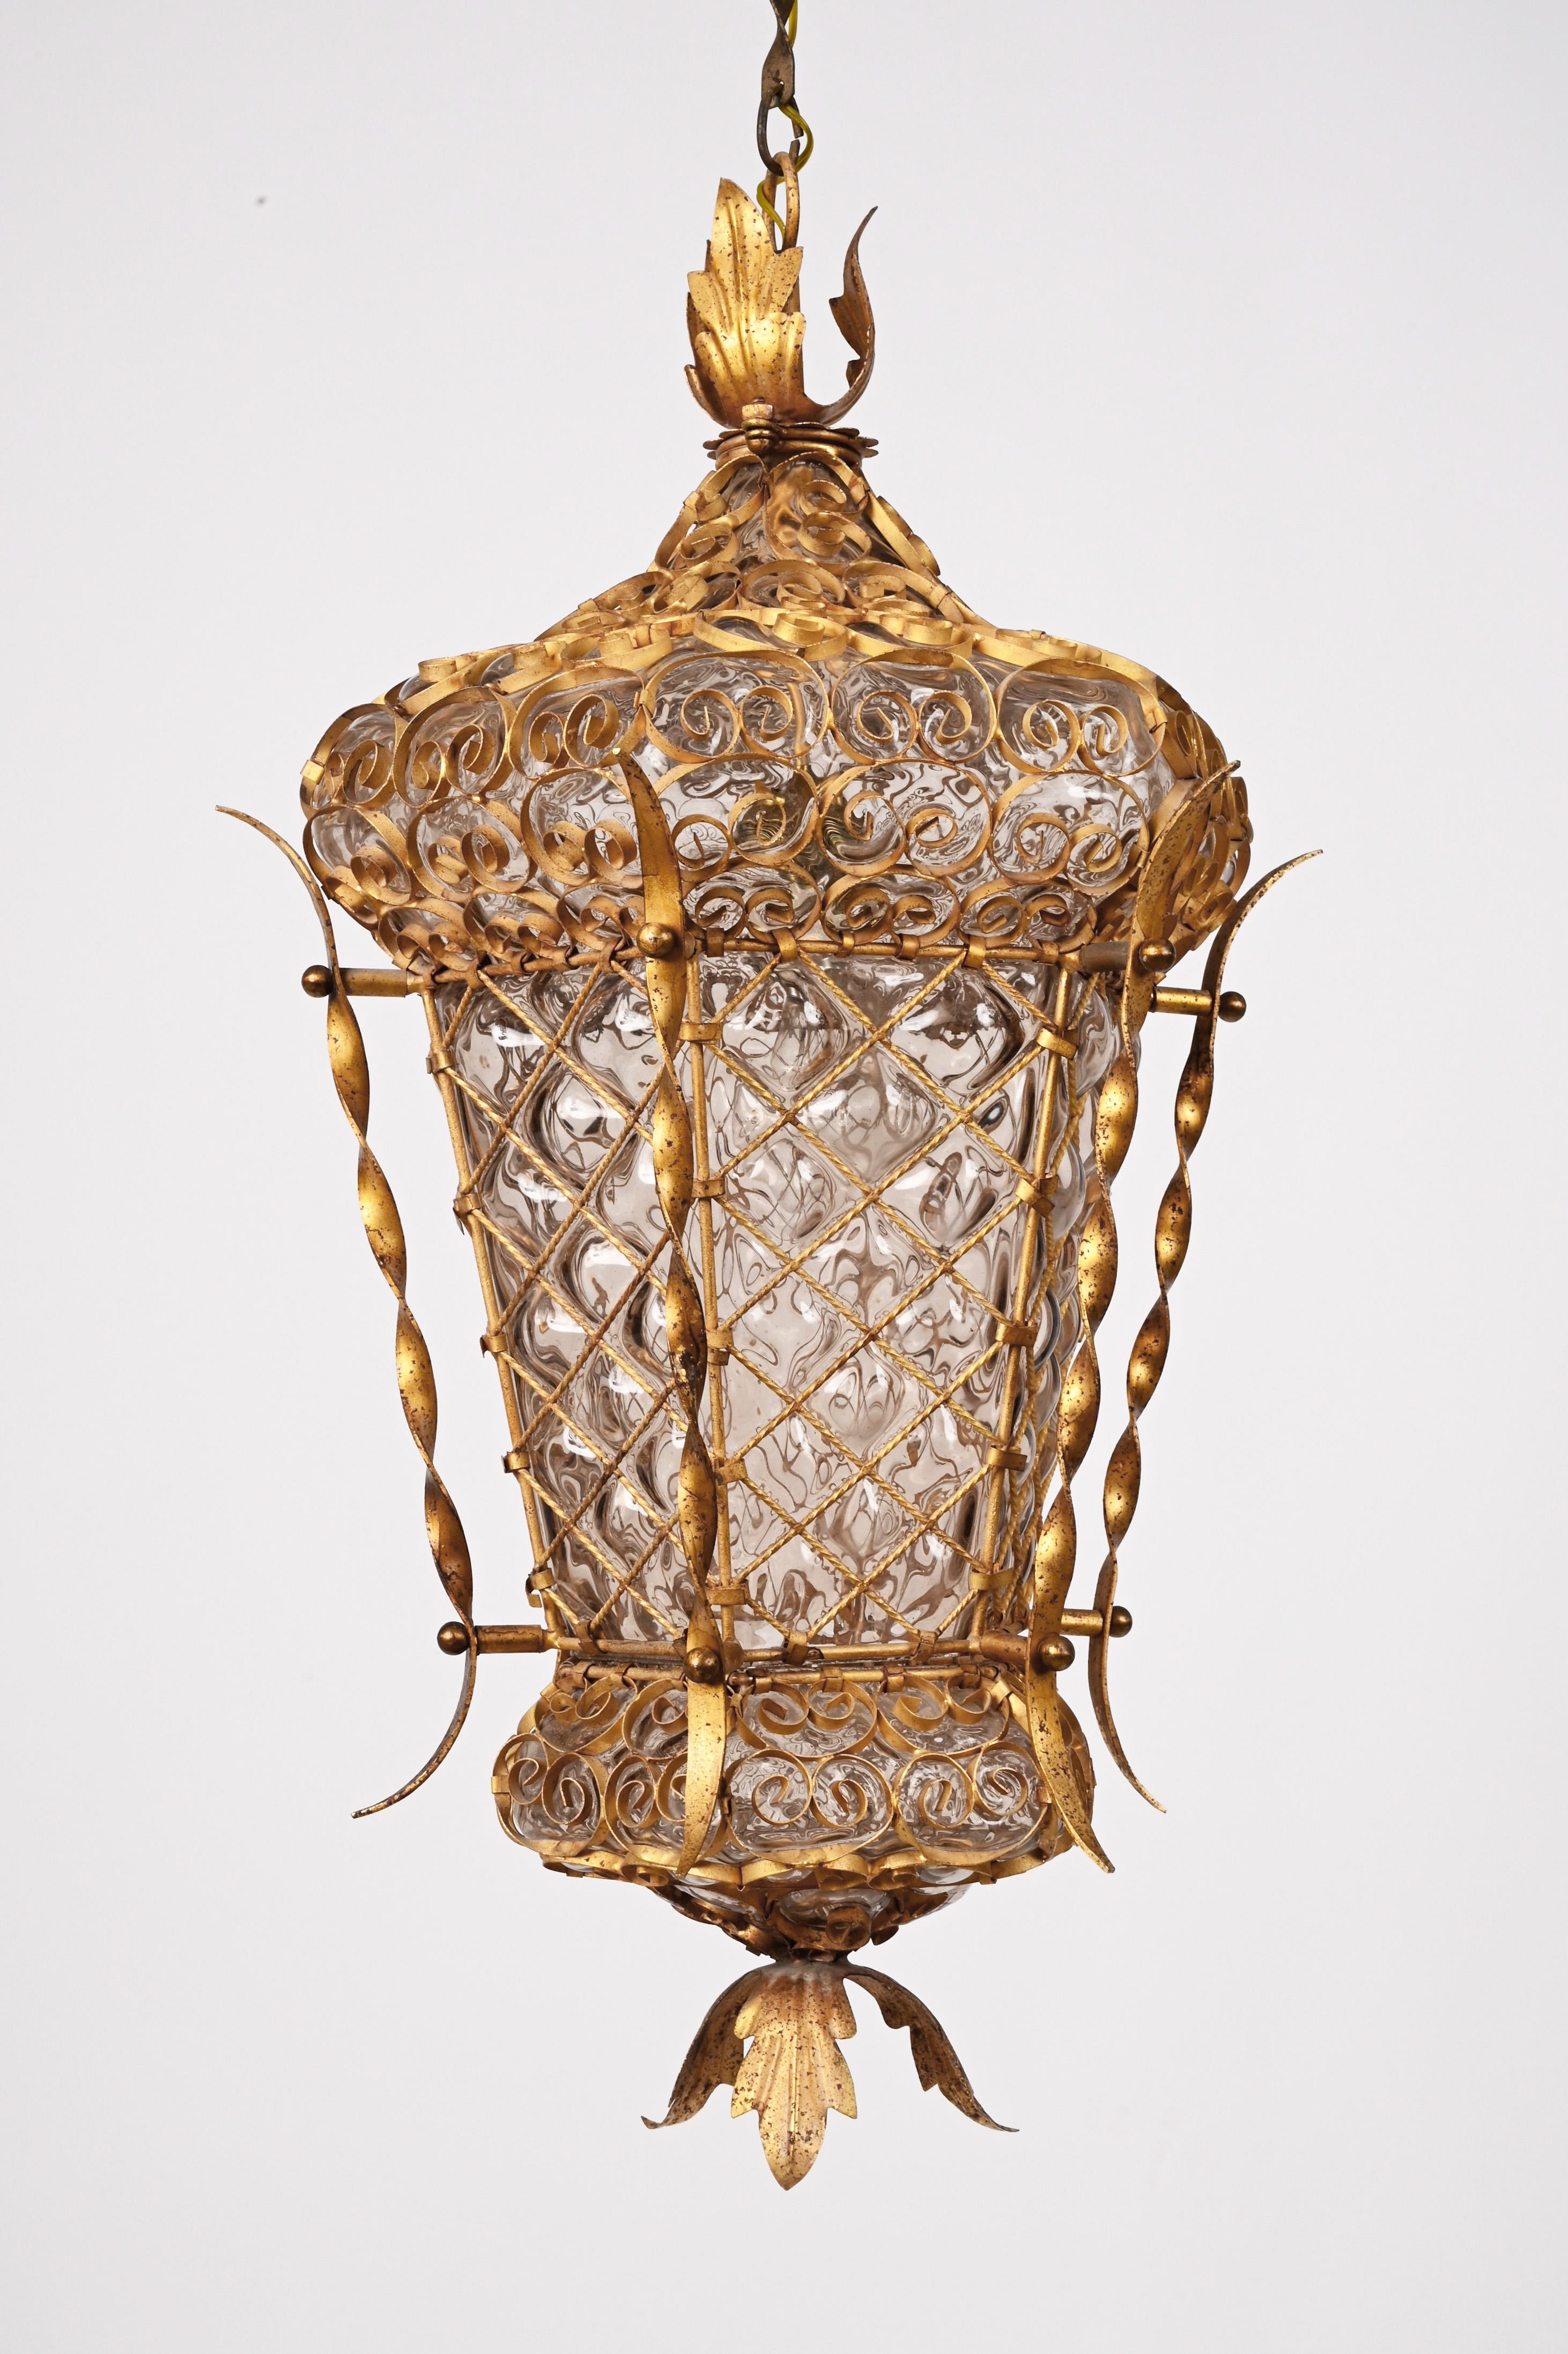 Art Glass Midcentury Venetian Mouth Blown Glass in Gold Painted Metal Frame Lantern, 1940s For Sale